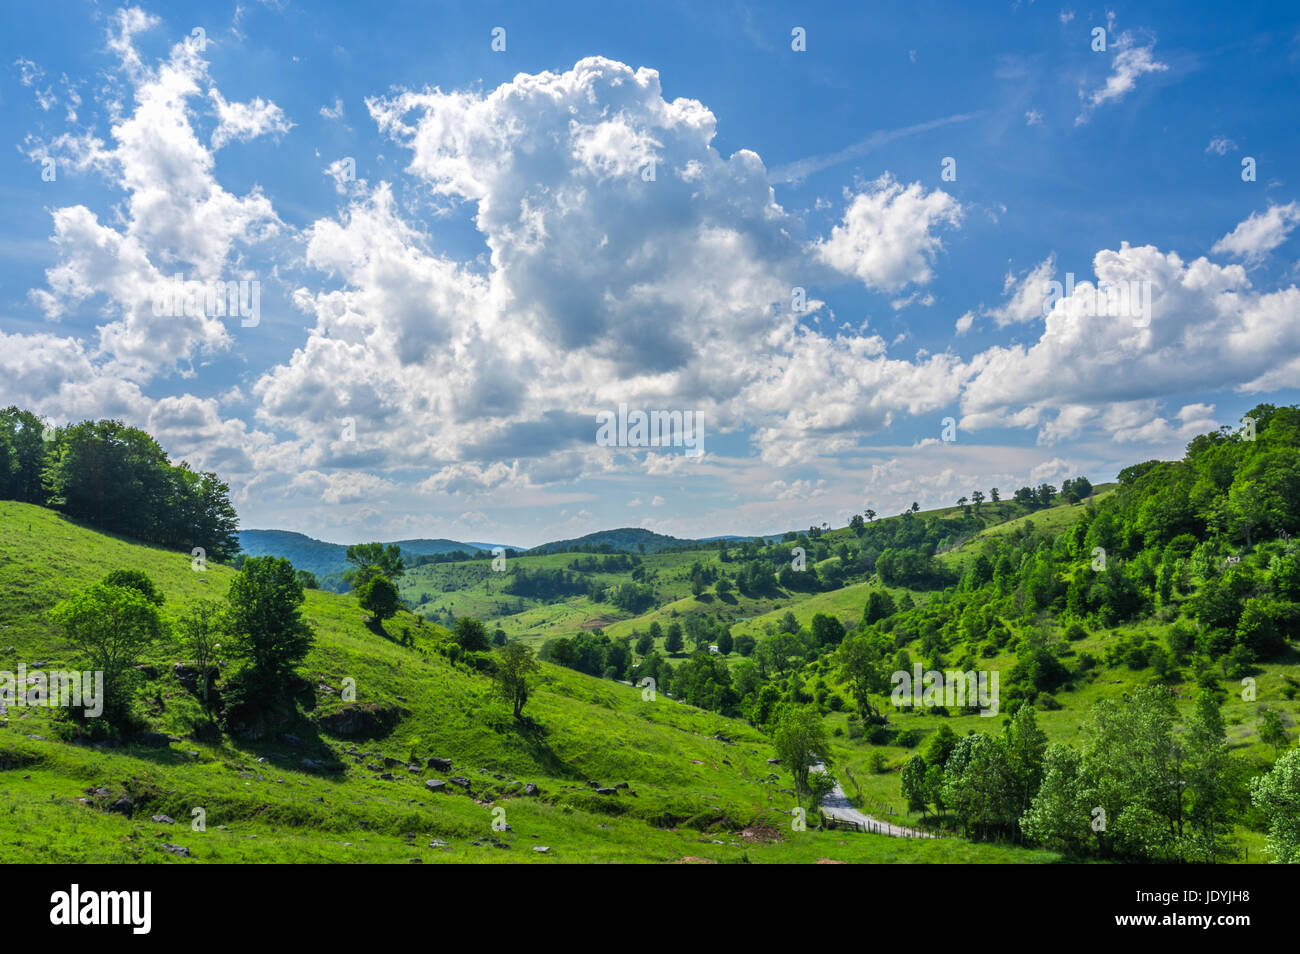 The karst and hilly landscape of the back country of West Virginia on a cloudy summer day. Stock Photo